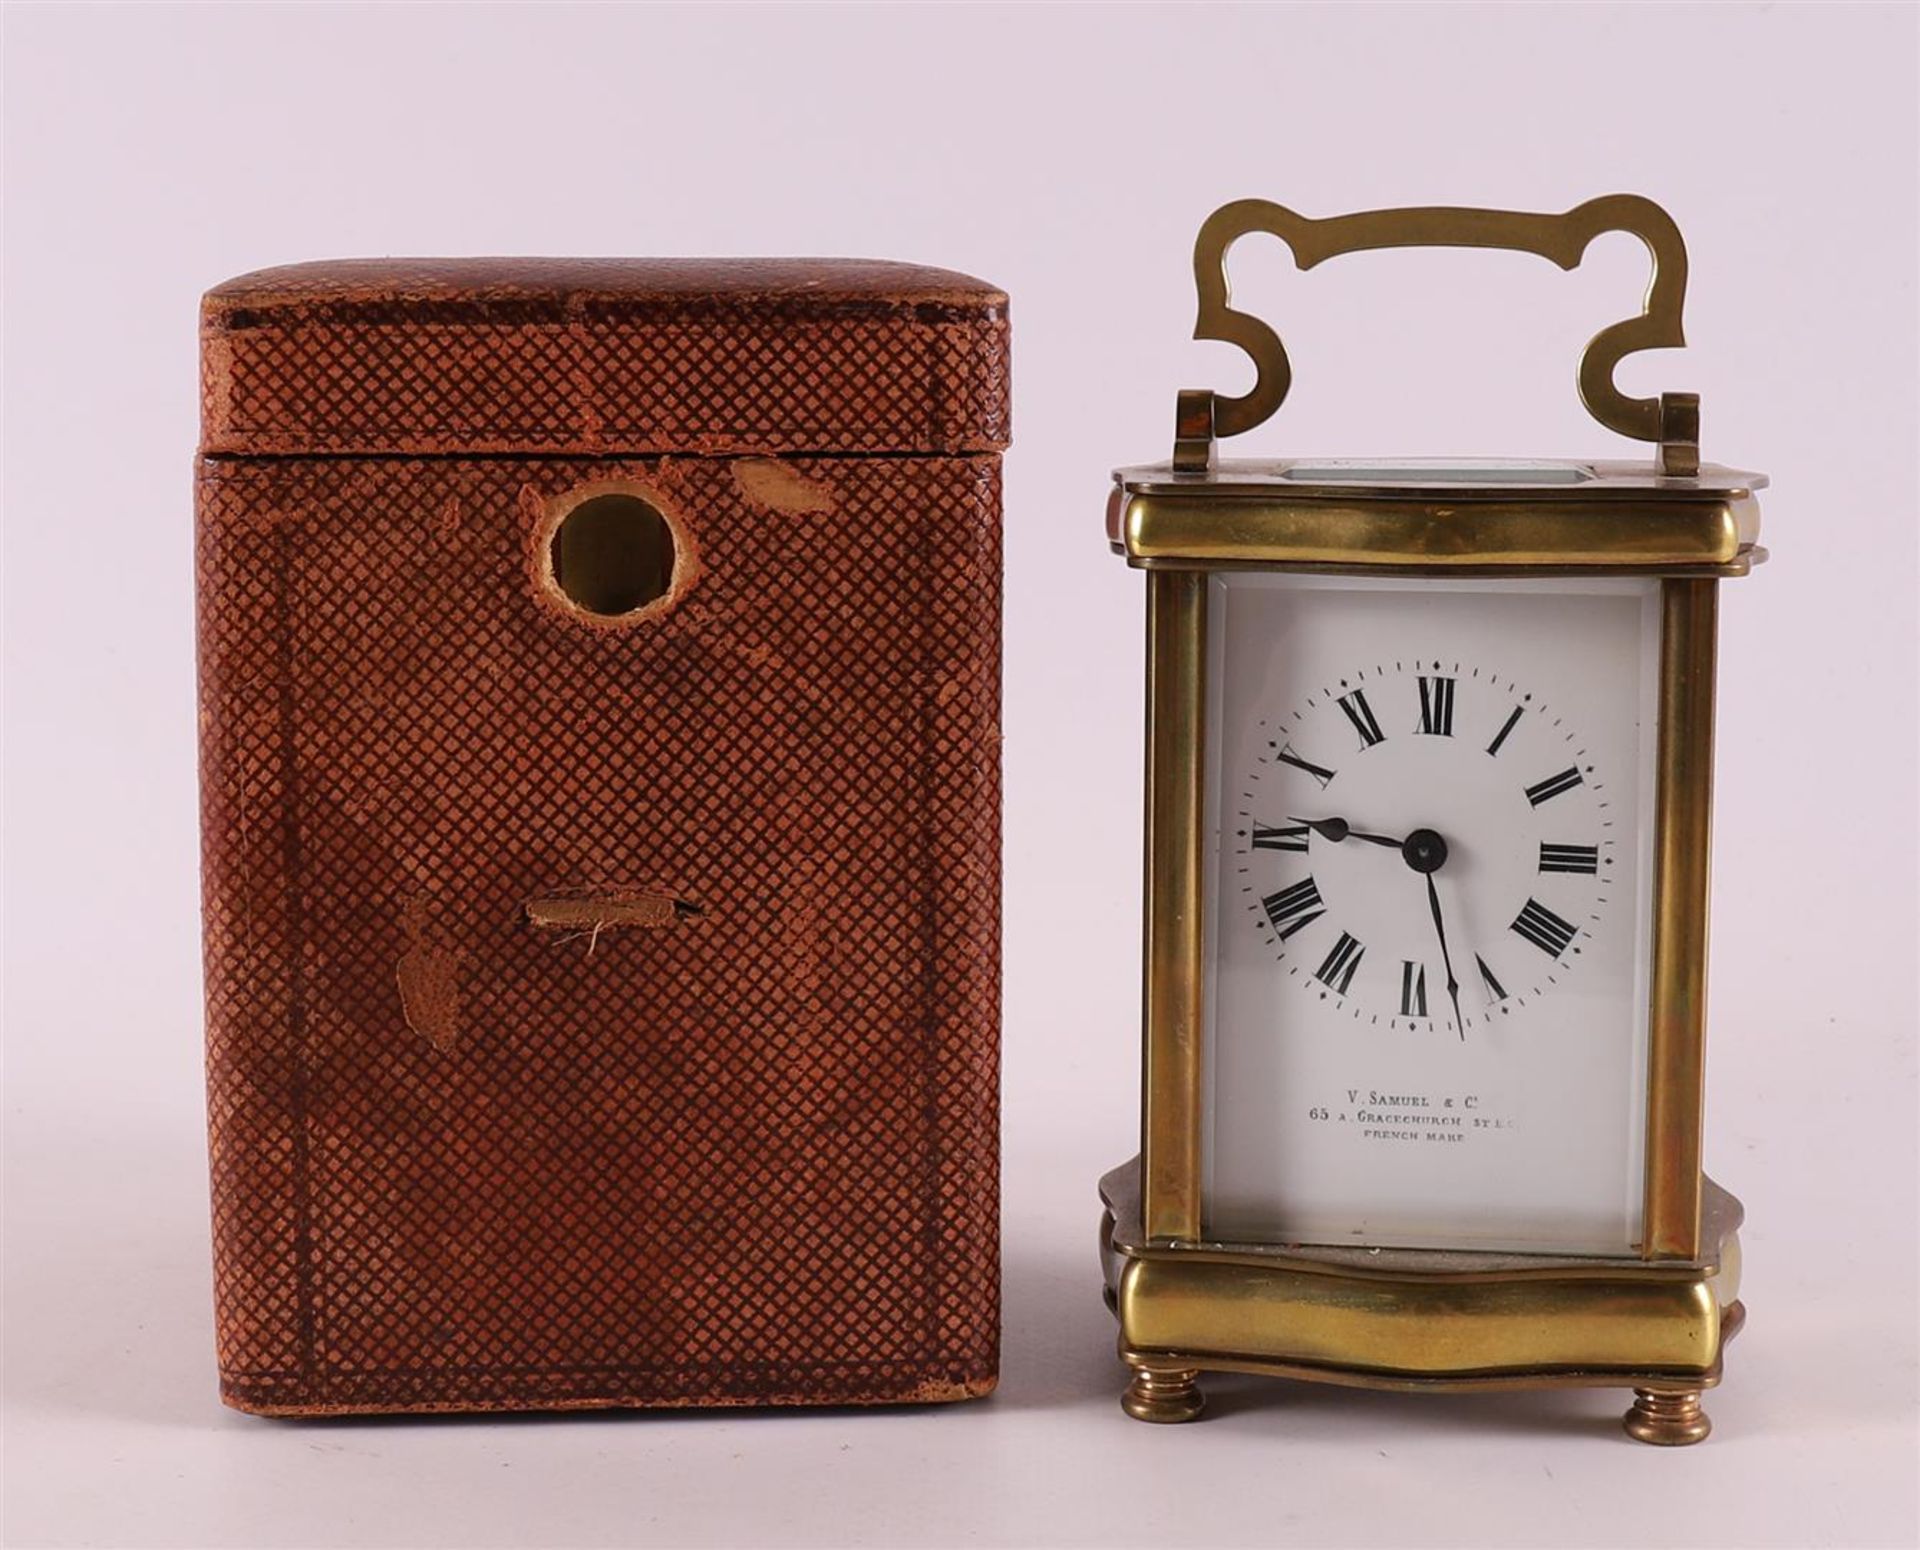 A travel clock in brass housing and original case, France,